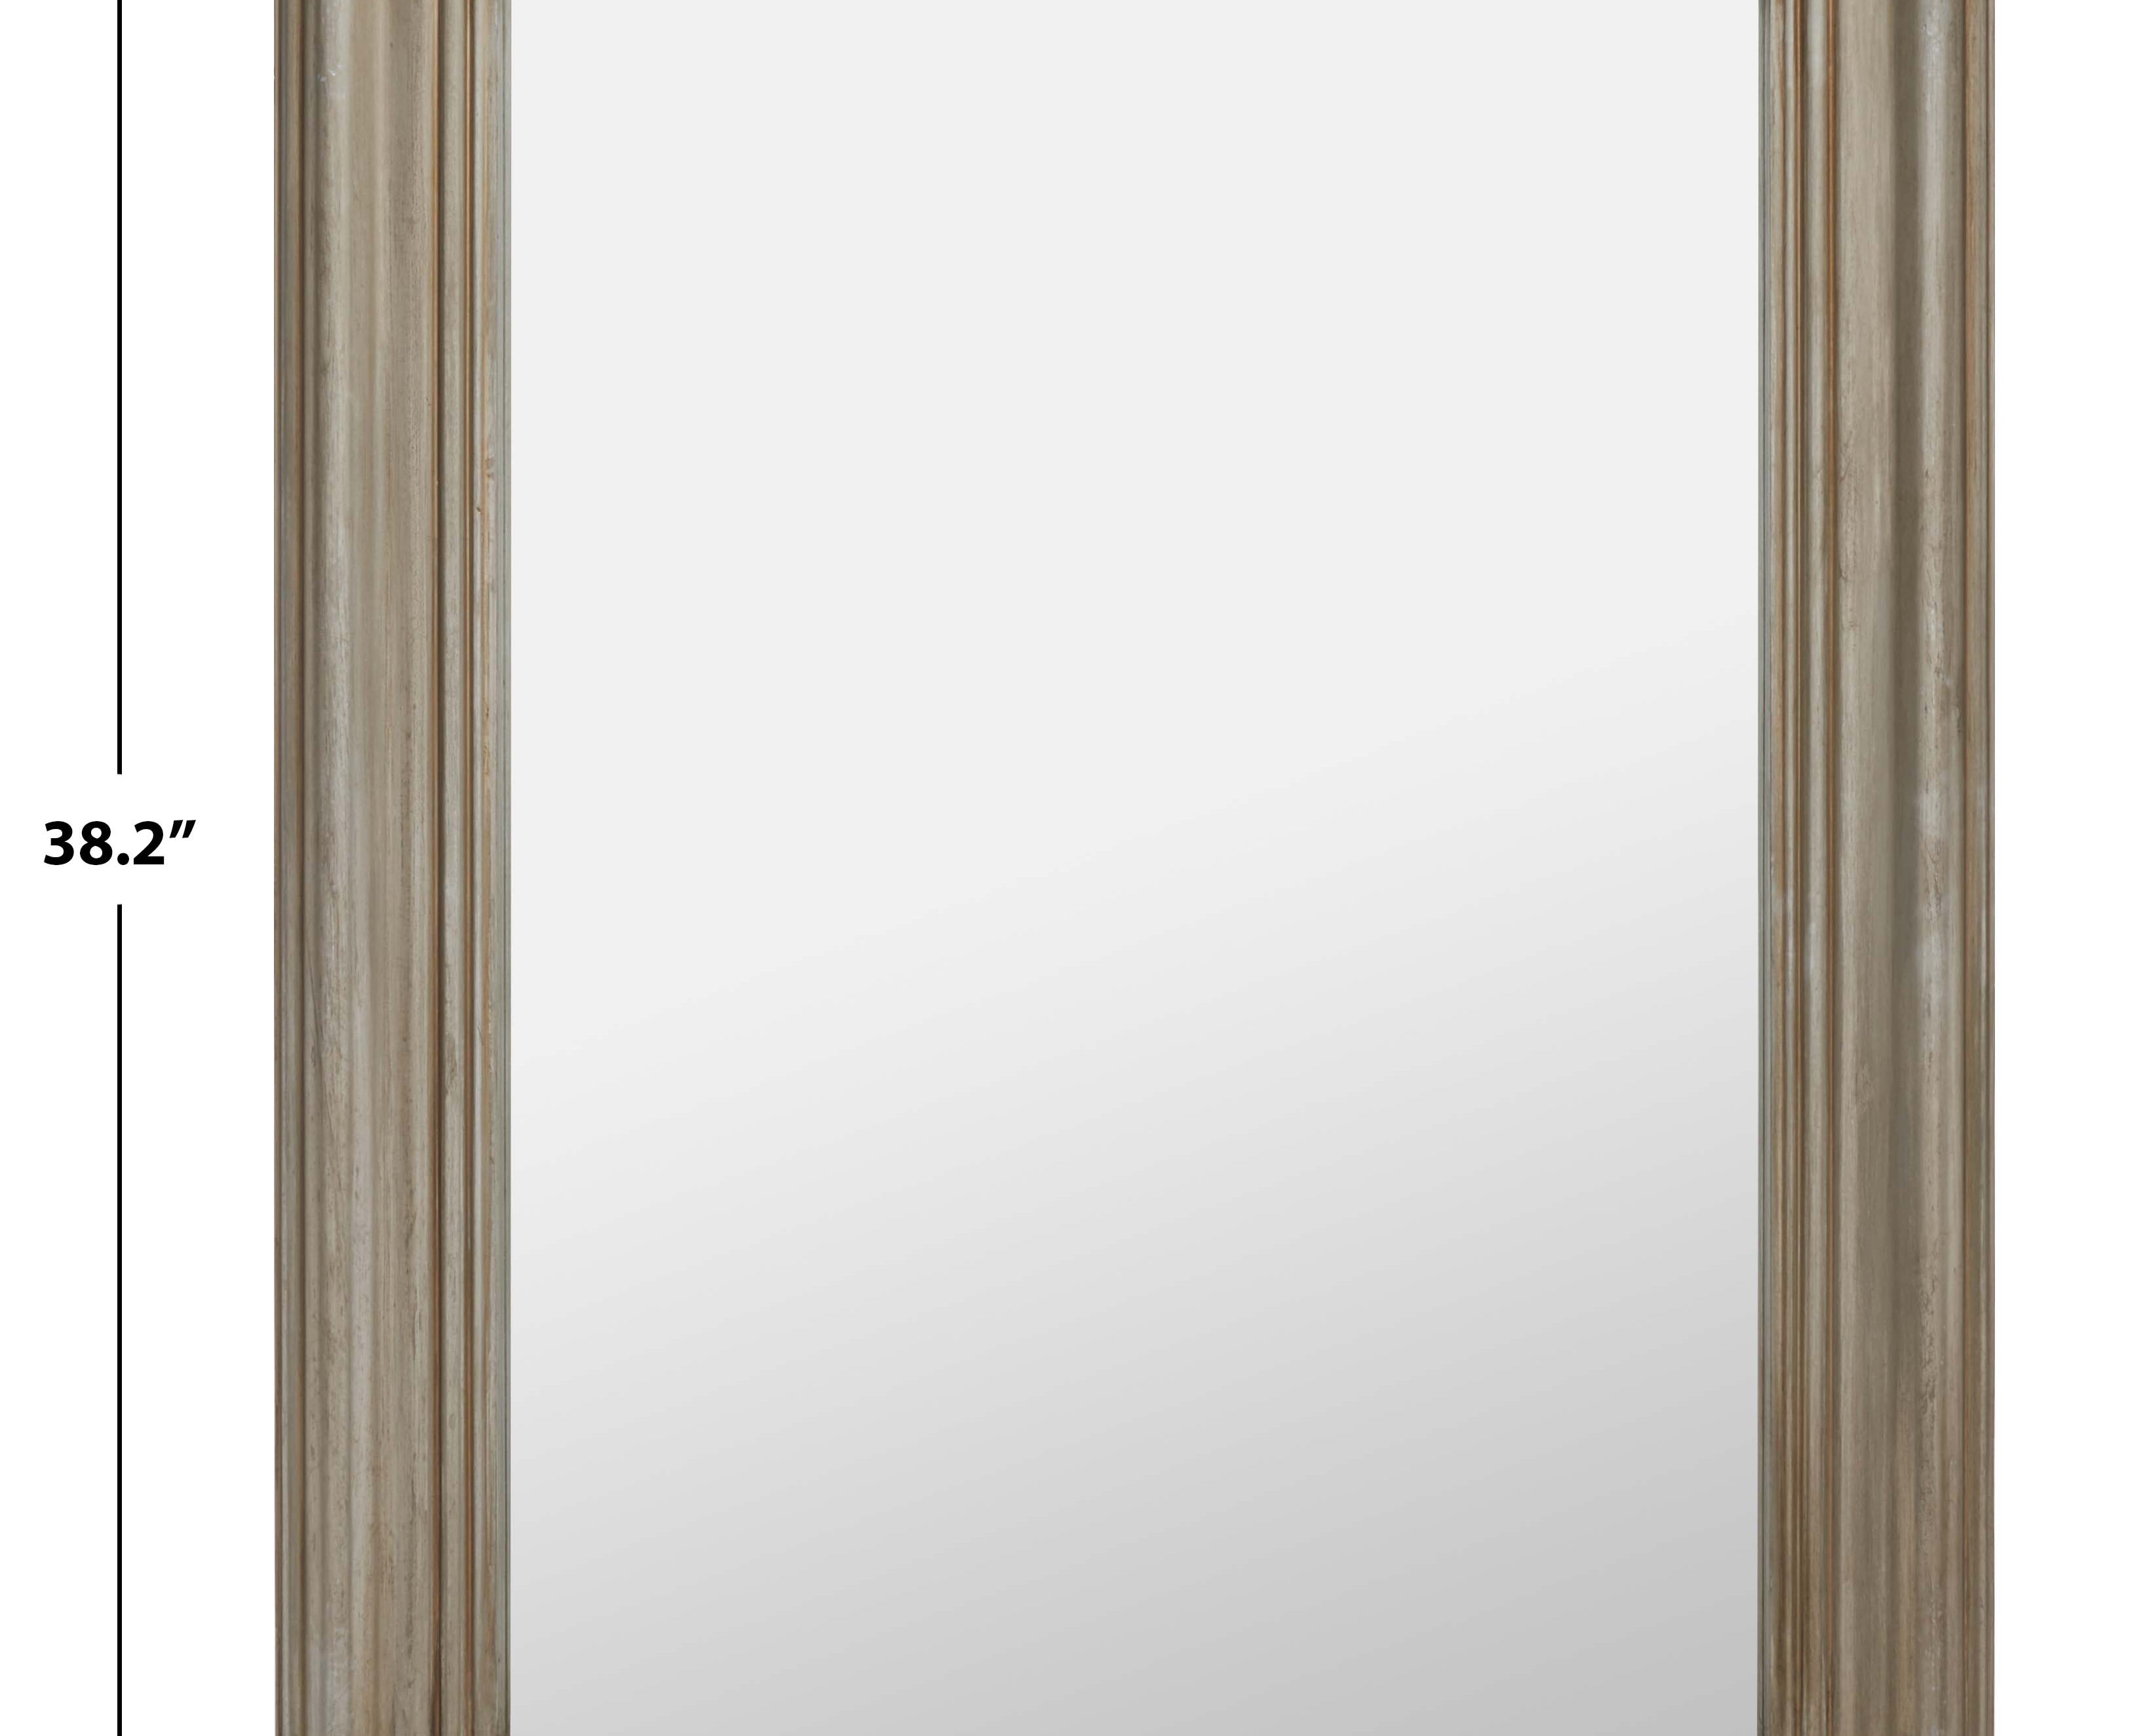 Safavieh Couture Bayleigh Small Metal Wall Mirror